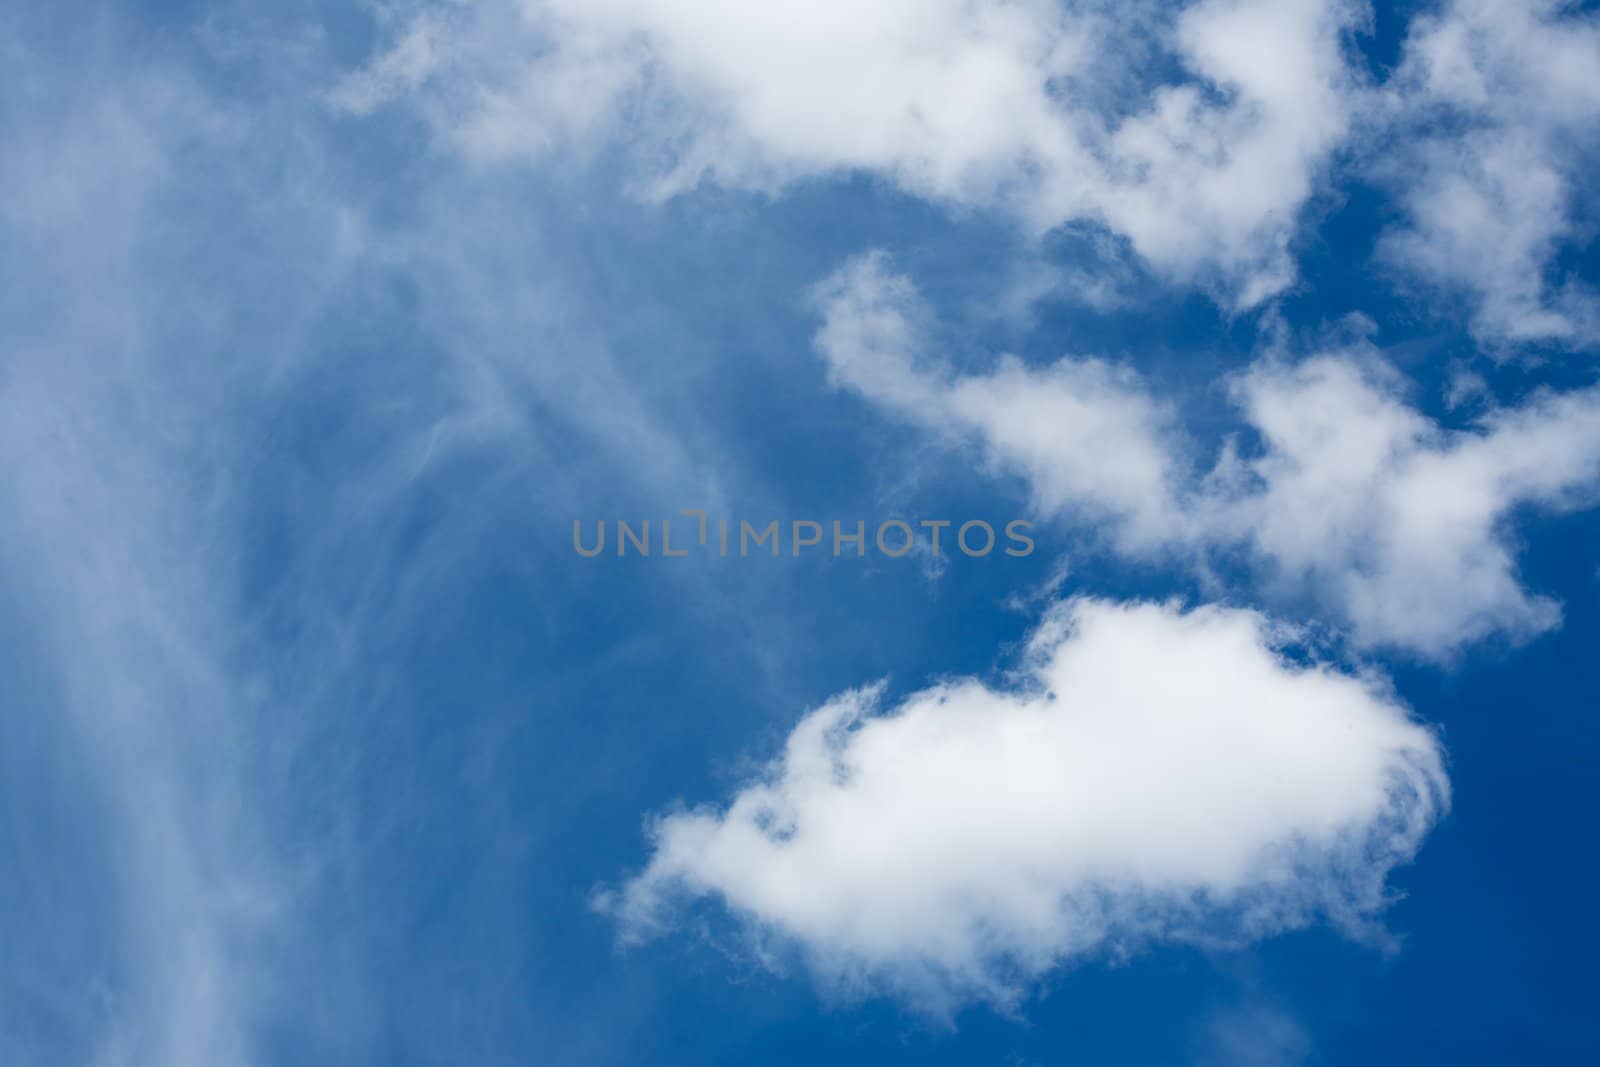 Summer sky with clouds, abstract background/